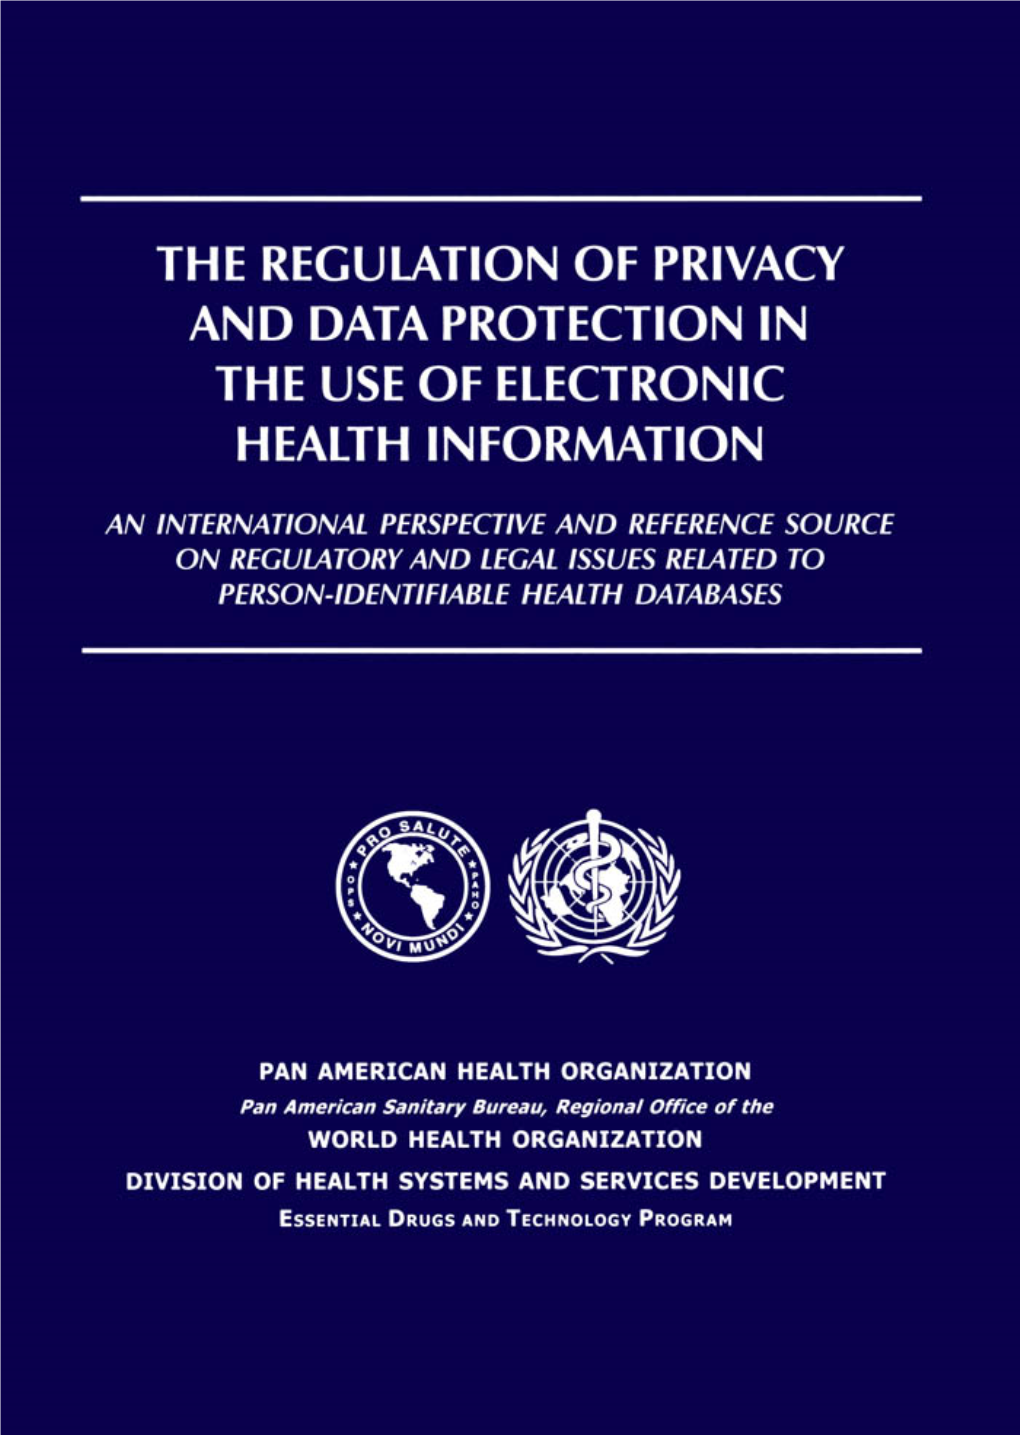 The Regulation of Privacy and Data Protection in the Use of Electronic Health Information